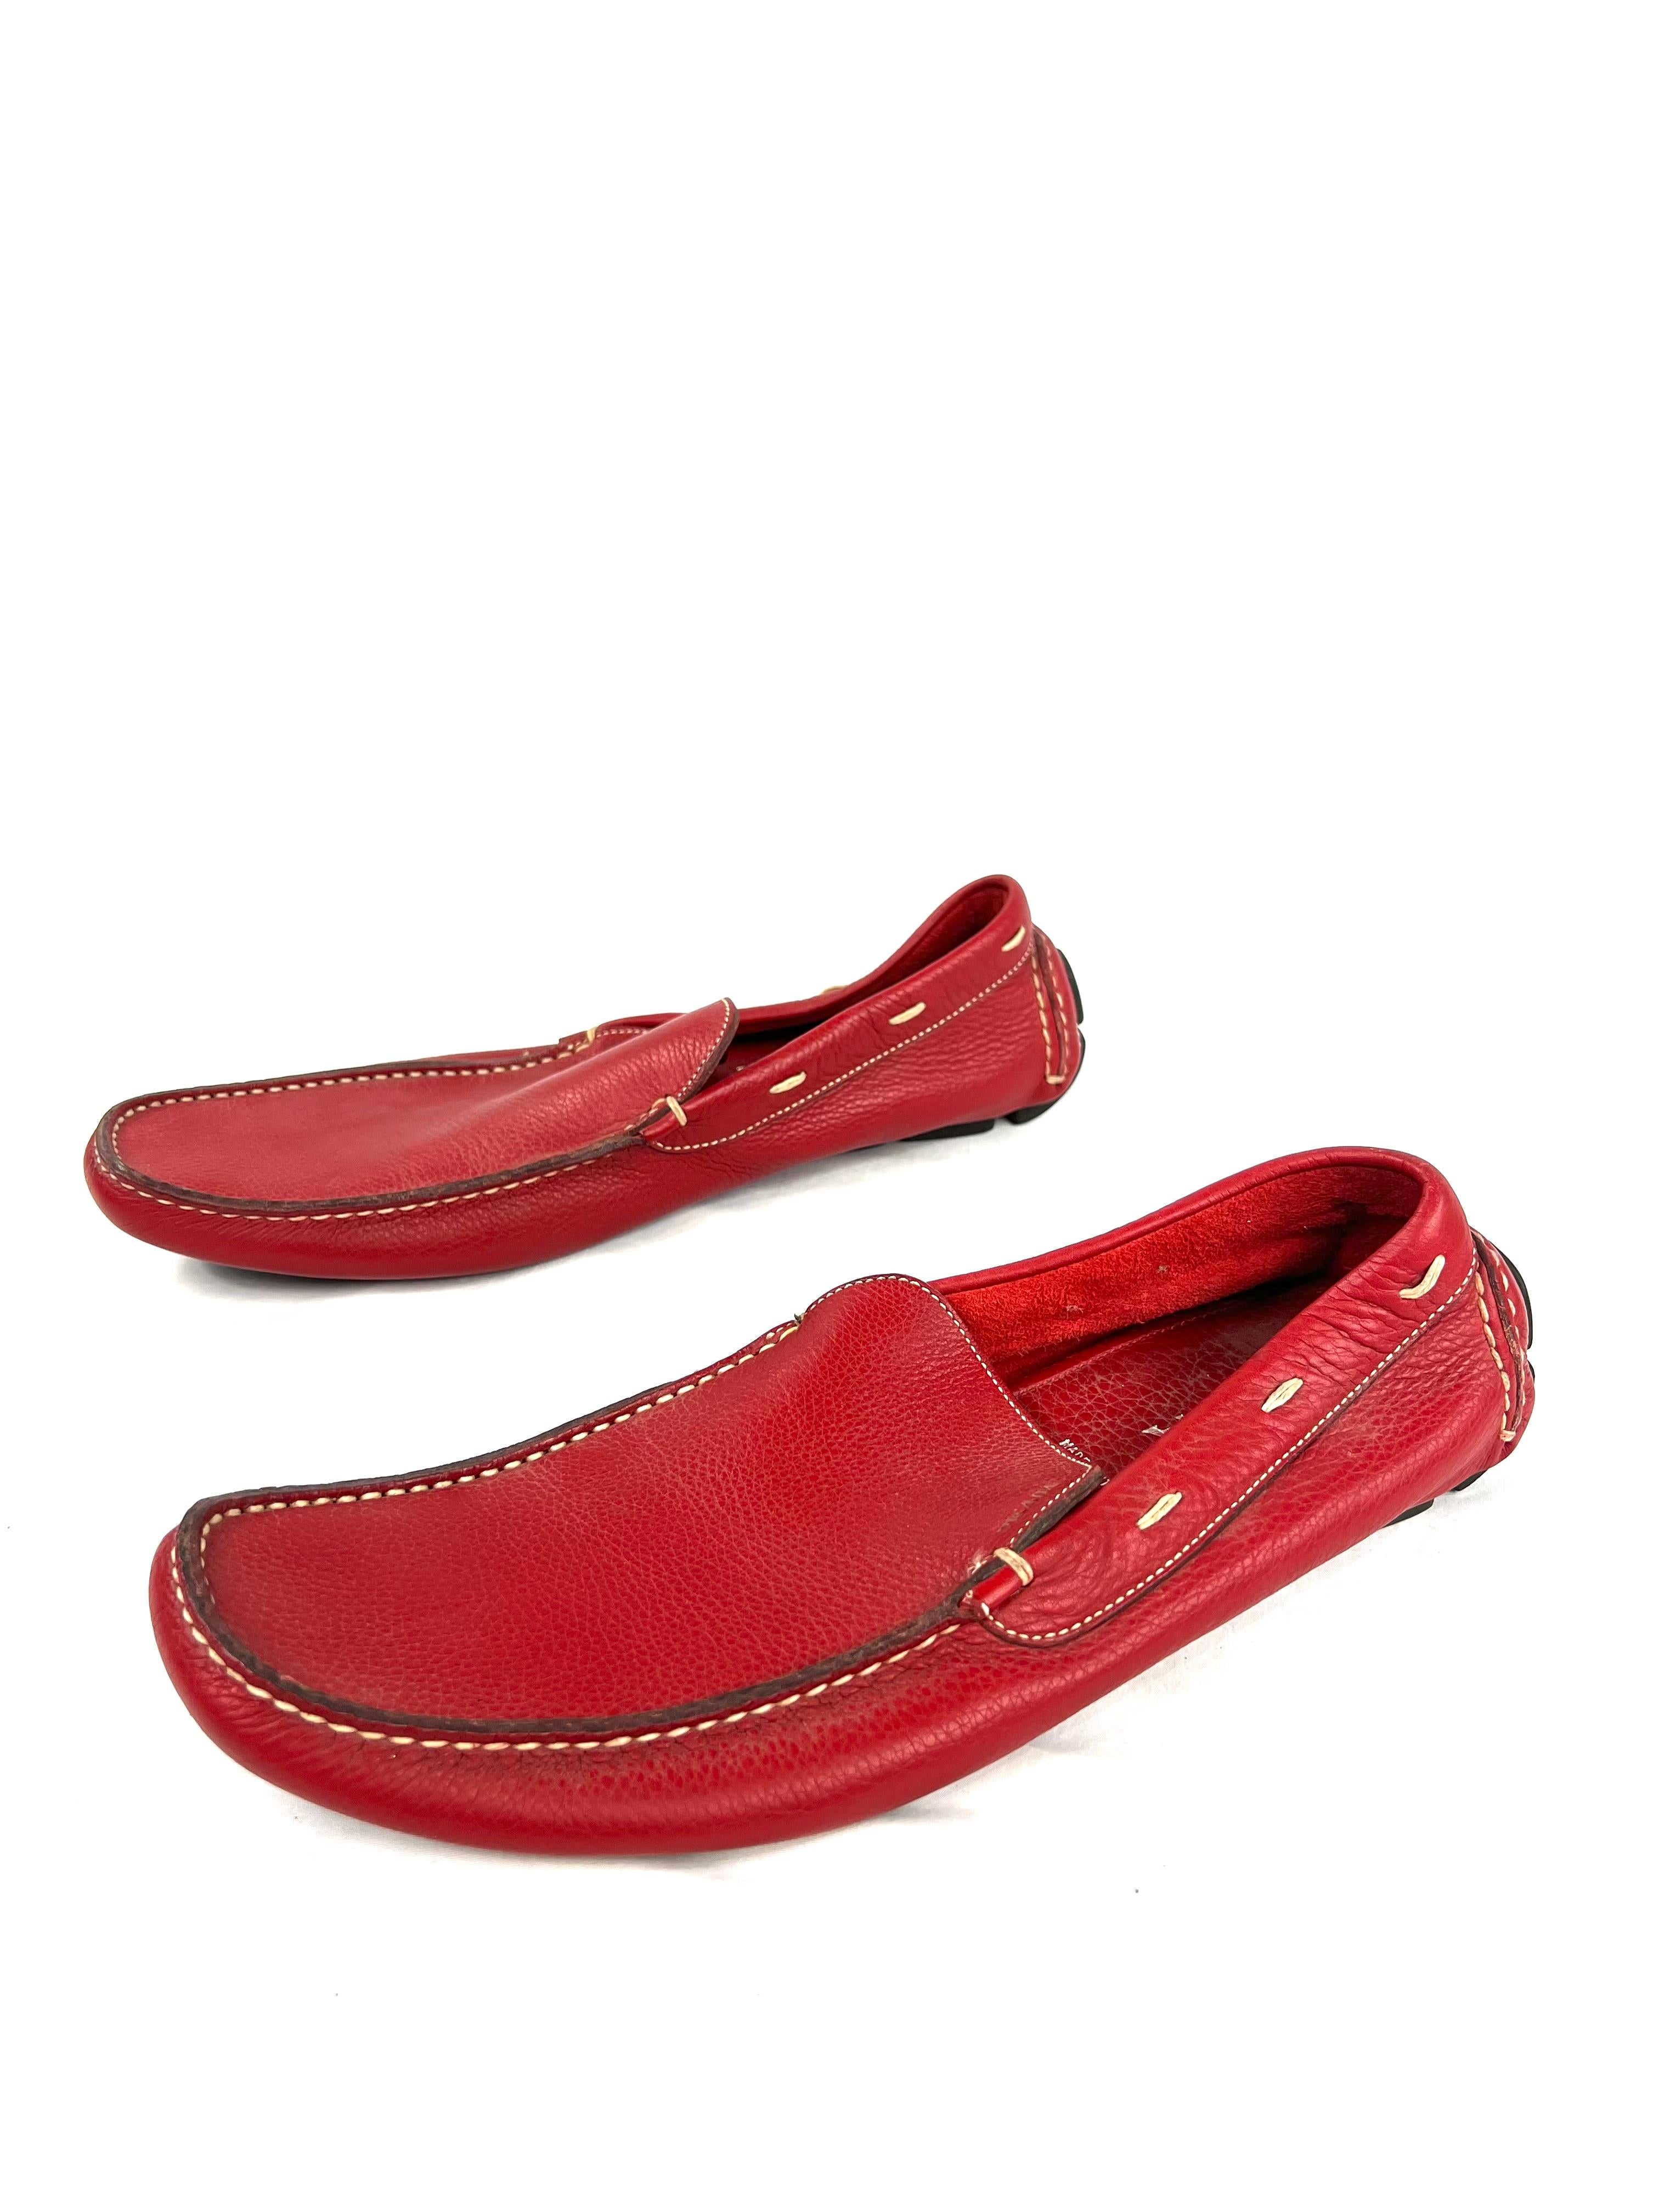 Product details:

The shoes are made out of red leather, it features white/ ivory stitching detail with rubber soles.